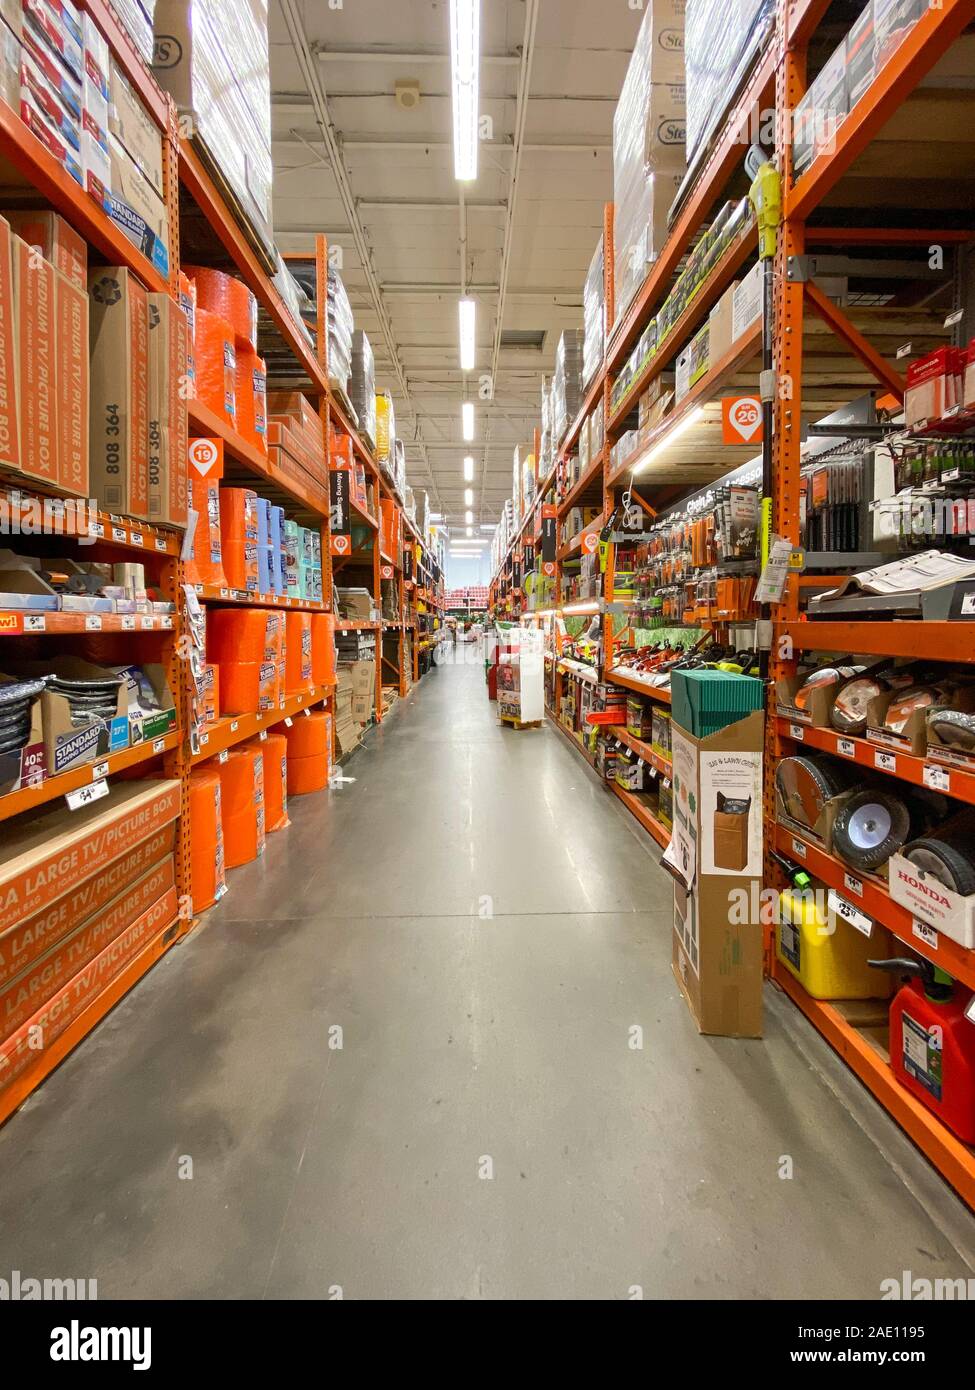 Aisle at The Home Depot hardware store. The Home Depot is the largest  american home improvement retailer, San Diego, USA, December 05th, 2019  Stock Photo - Alamy